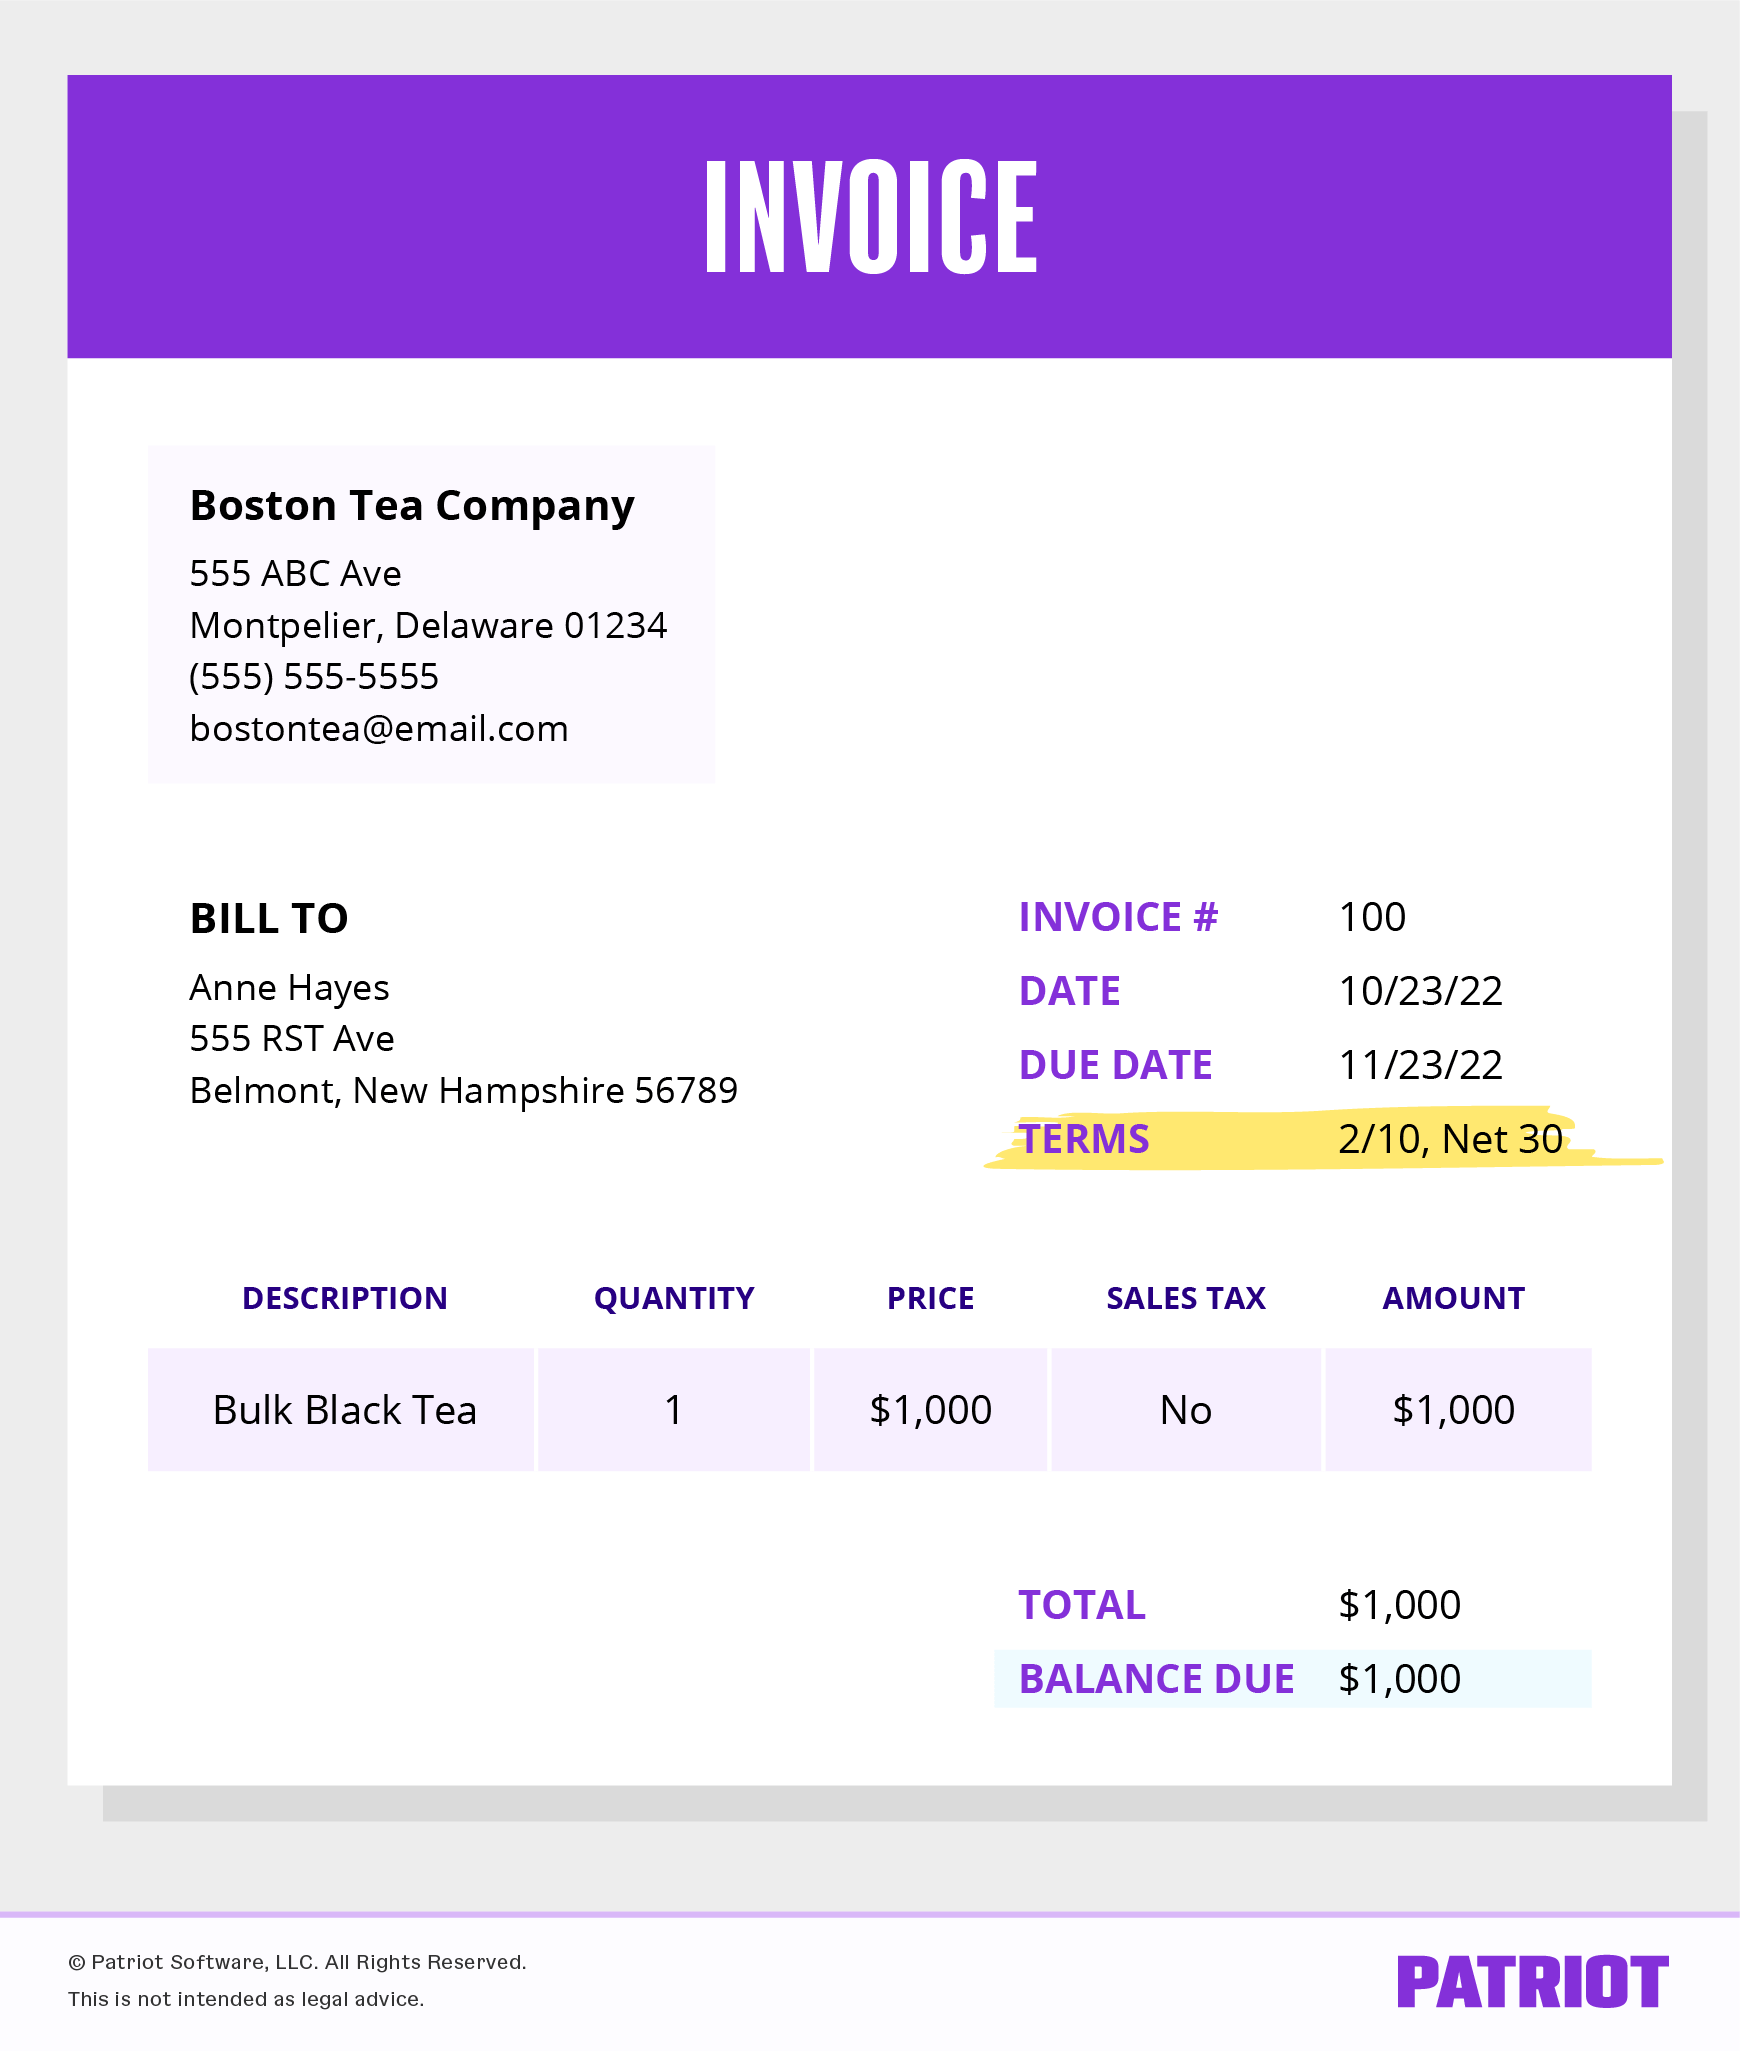 invoice example showing early payment discount